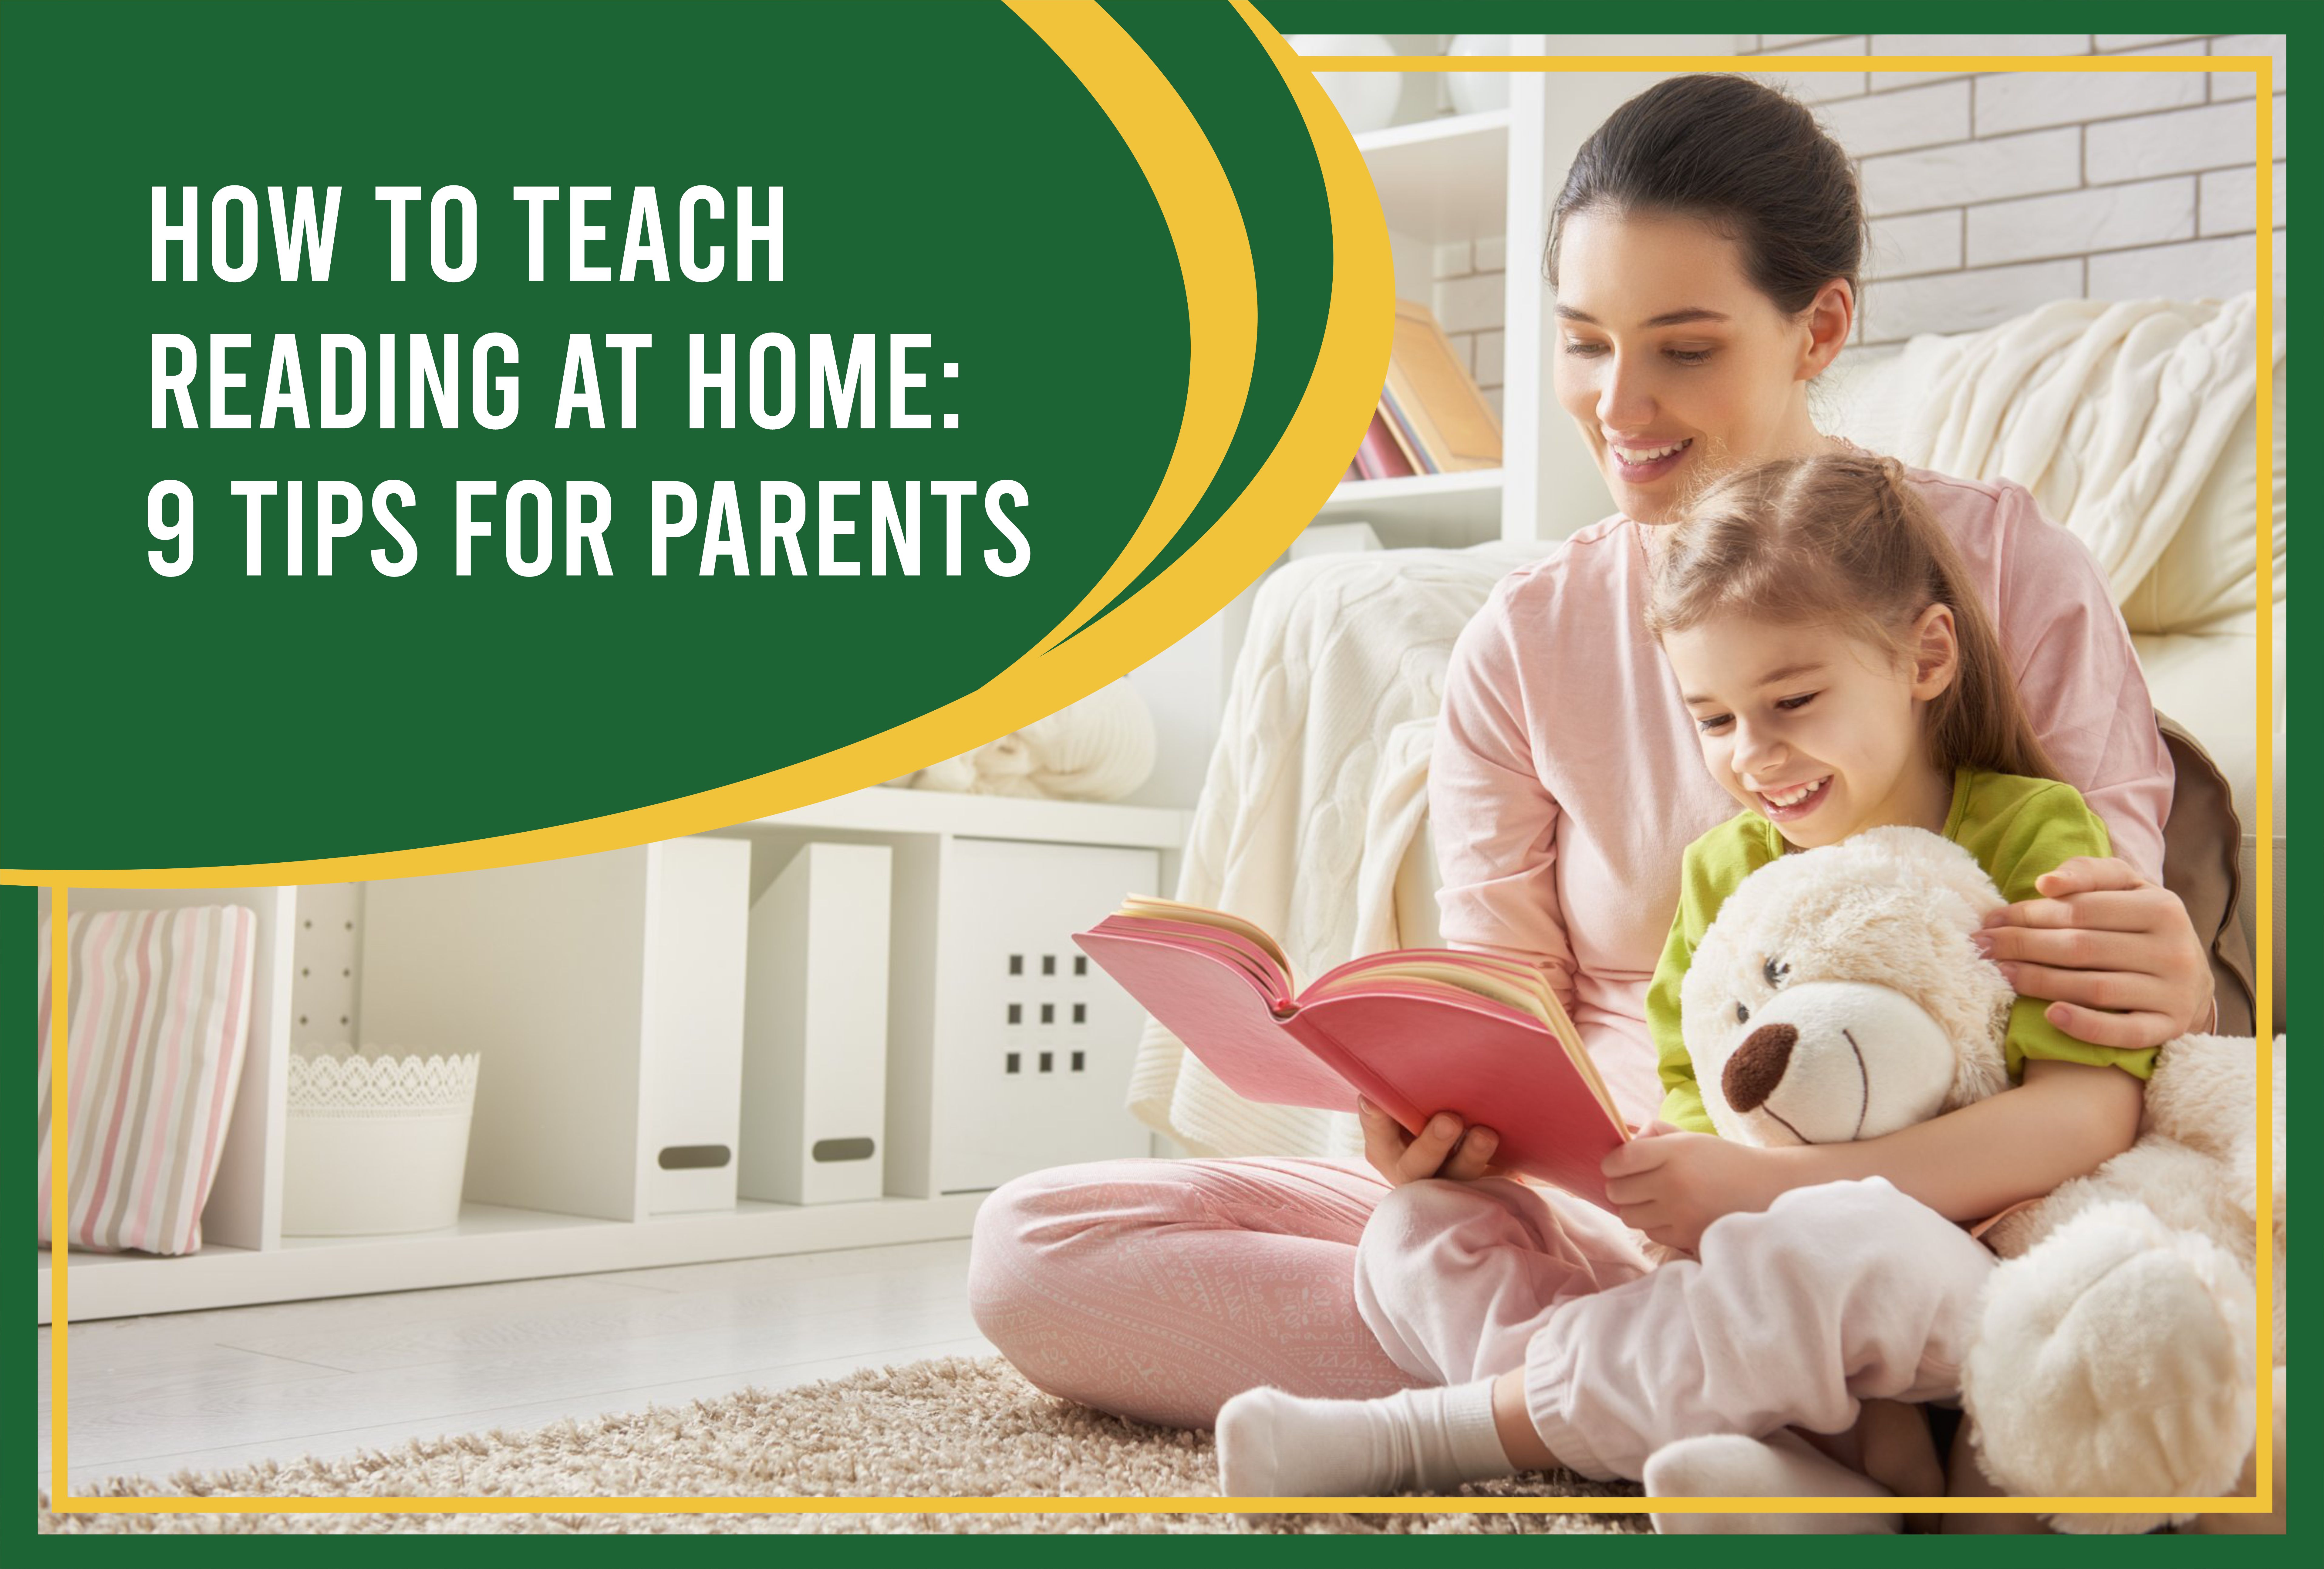 How to Teach Reading at Home